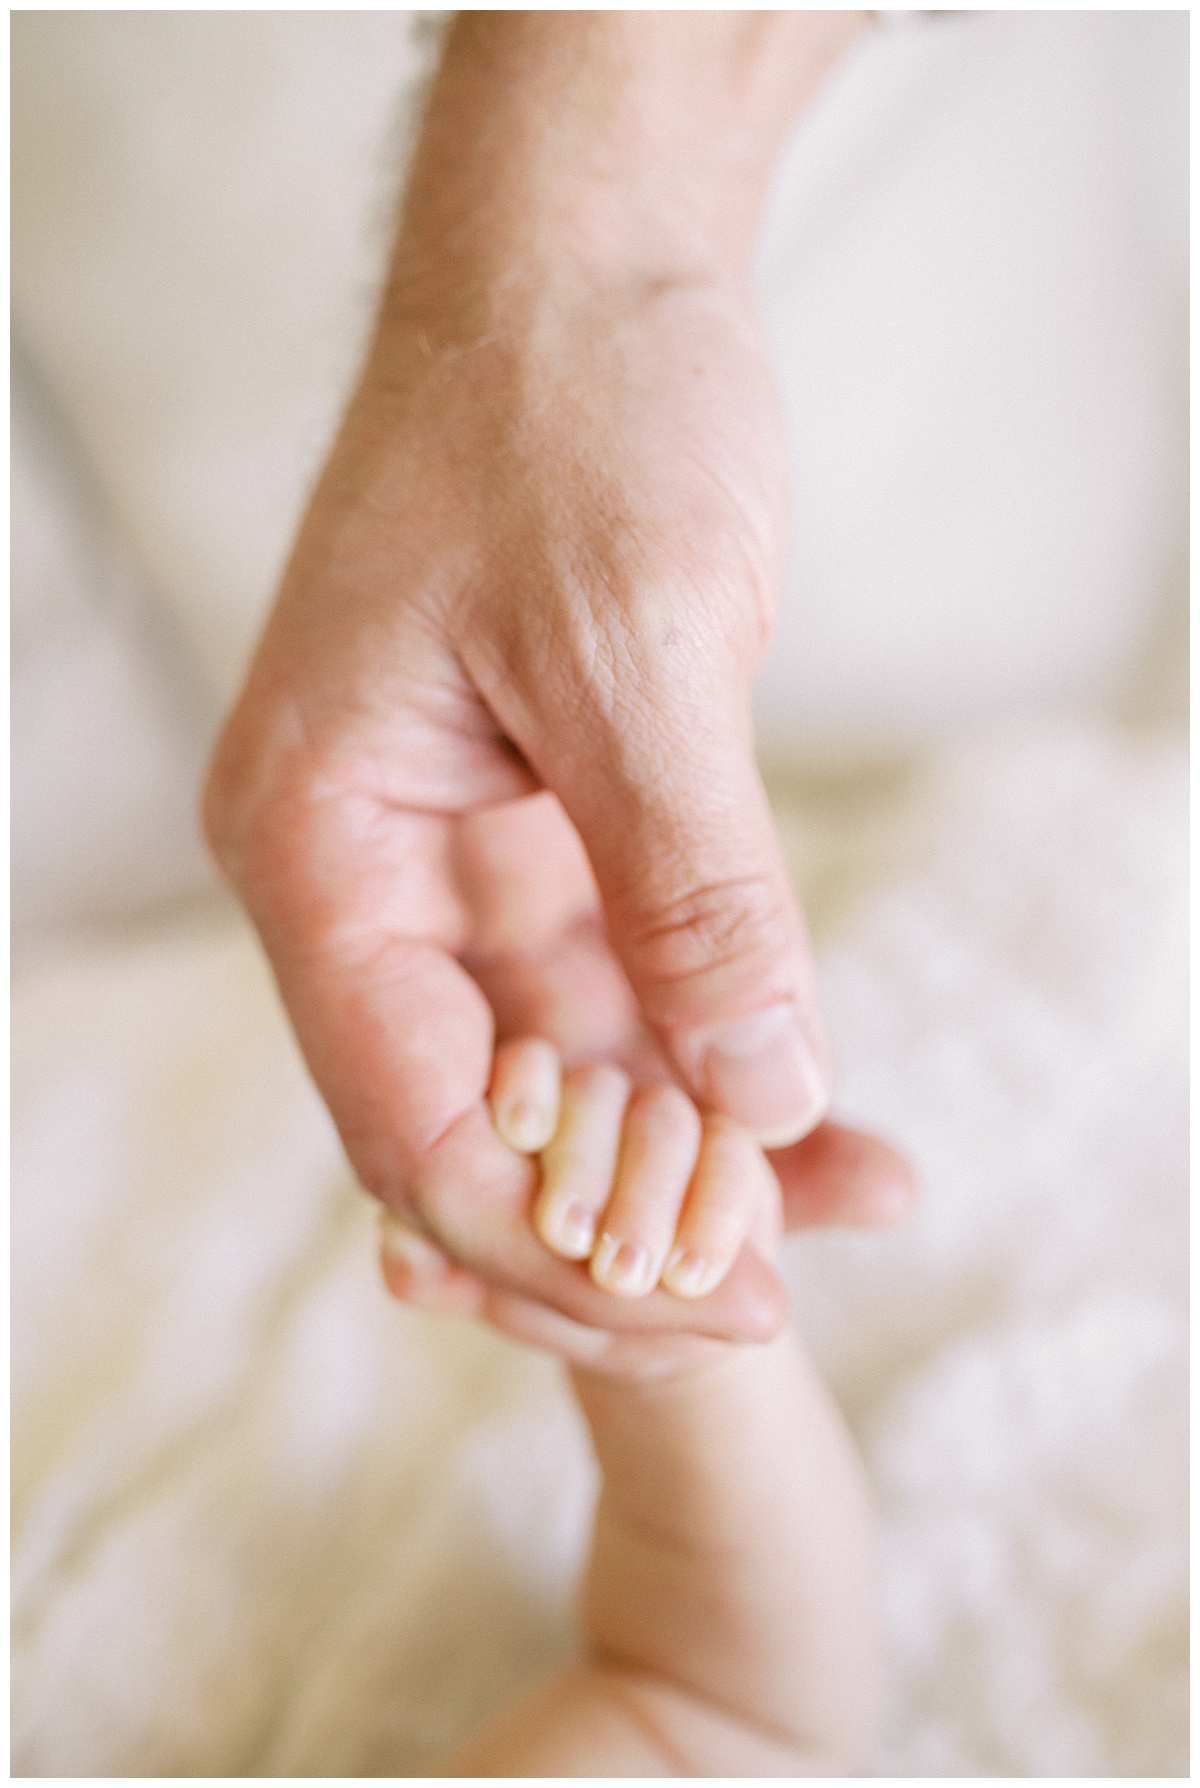 a newborn holding their father's finger